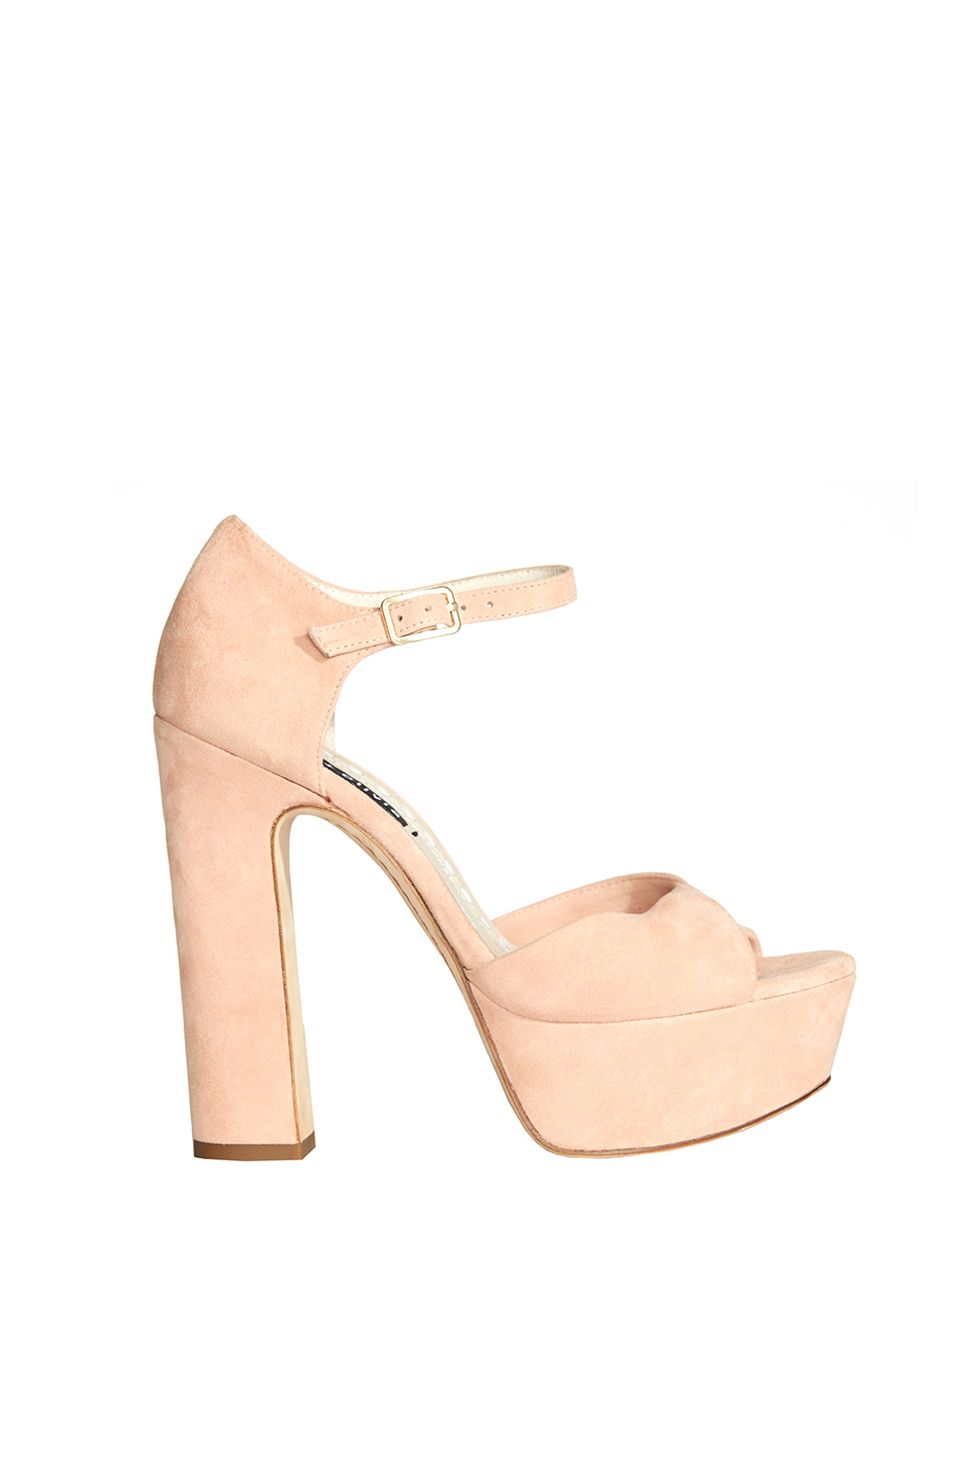 <p>These suede platforms have a twist front and a cushiony sole.</p><p>Layla Suede Heel, $350; <a href="https://www.aliceandolivia.com/layla-suede-heel.html" target="_blank" data-tracking-id="recirc-text-link">aliceandolivia.com</a></p>